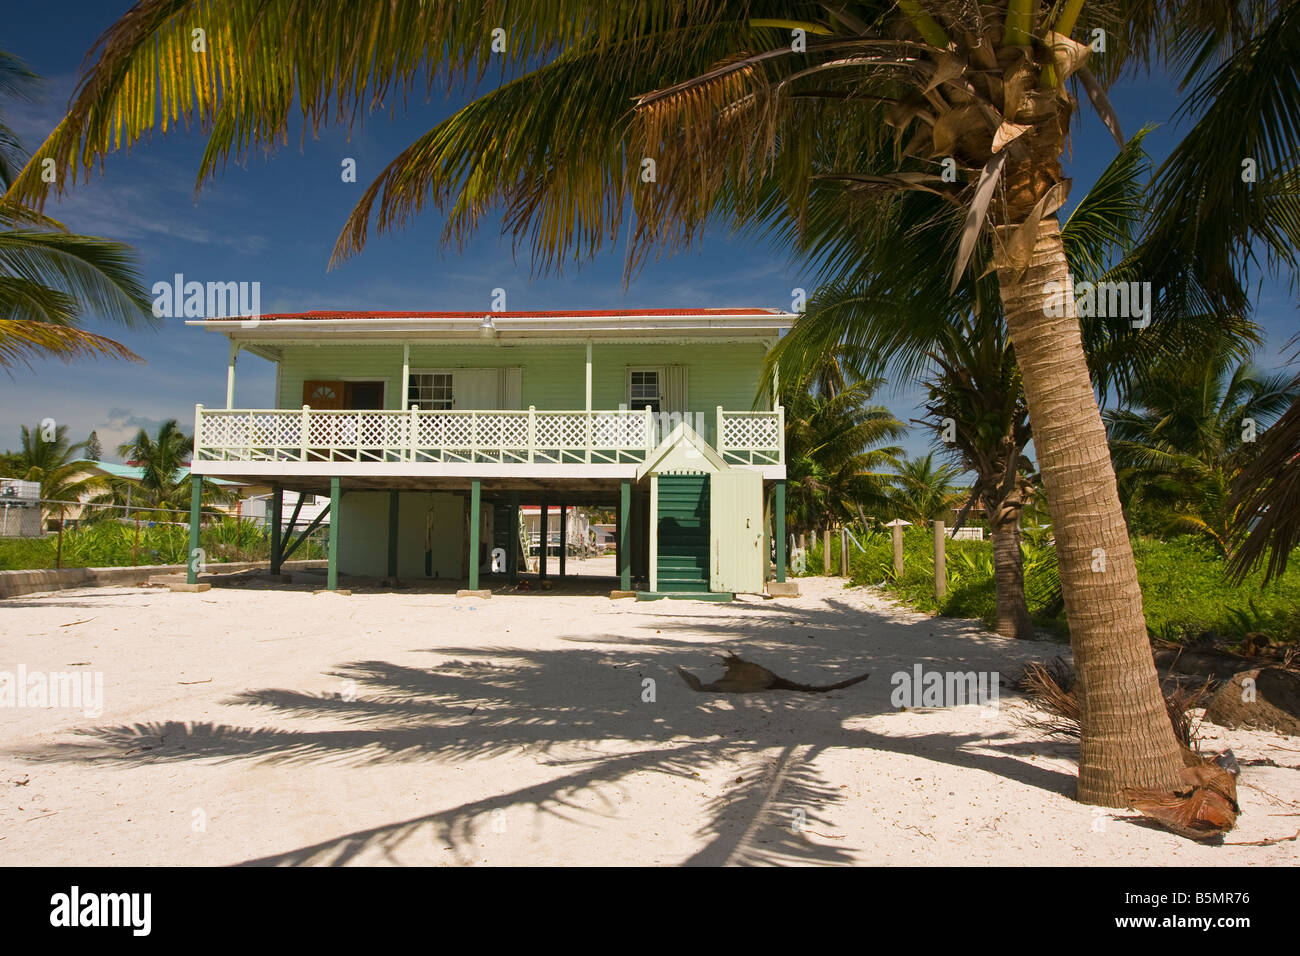 CAYE CAULKER BELIZE Wooden house on stilts on sand beach with palm trees Stock Photo